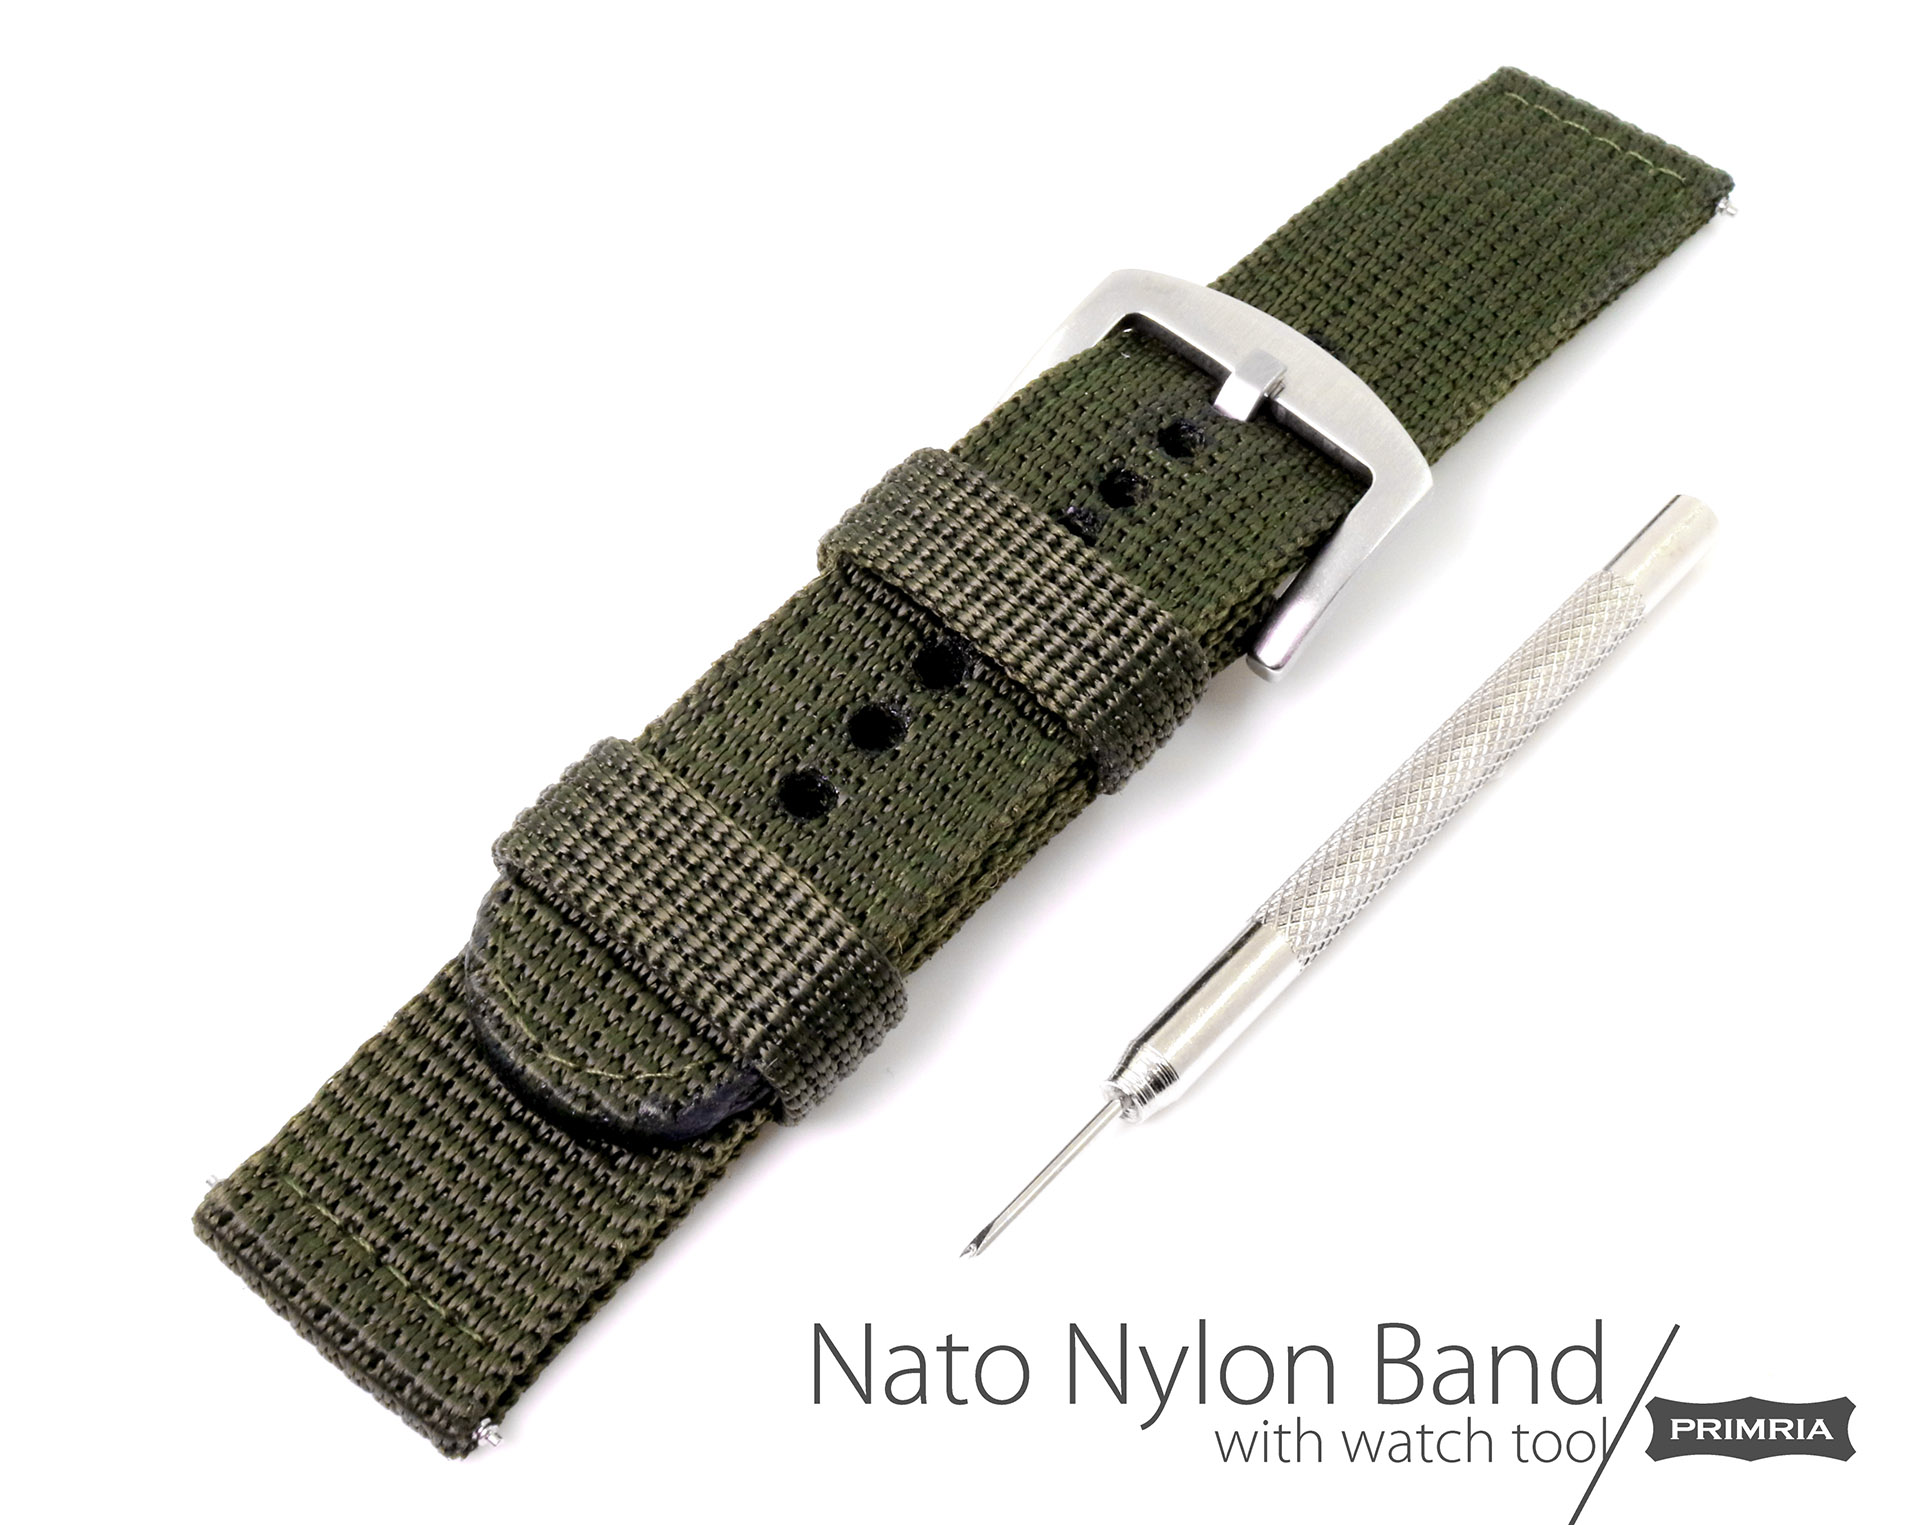 Shop Watch Straps by Color, Width & Material